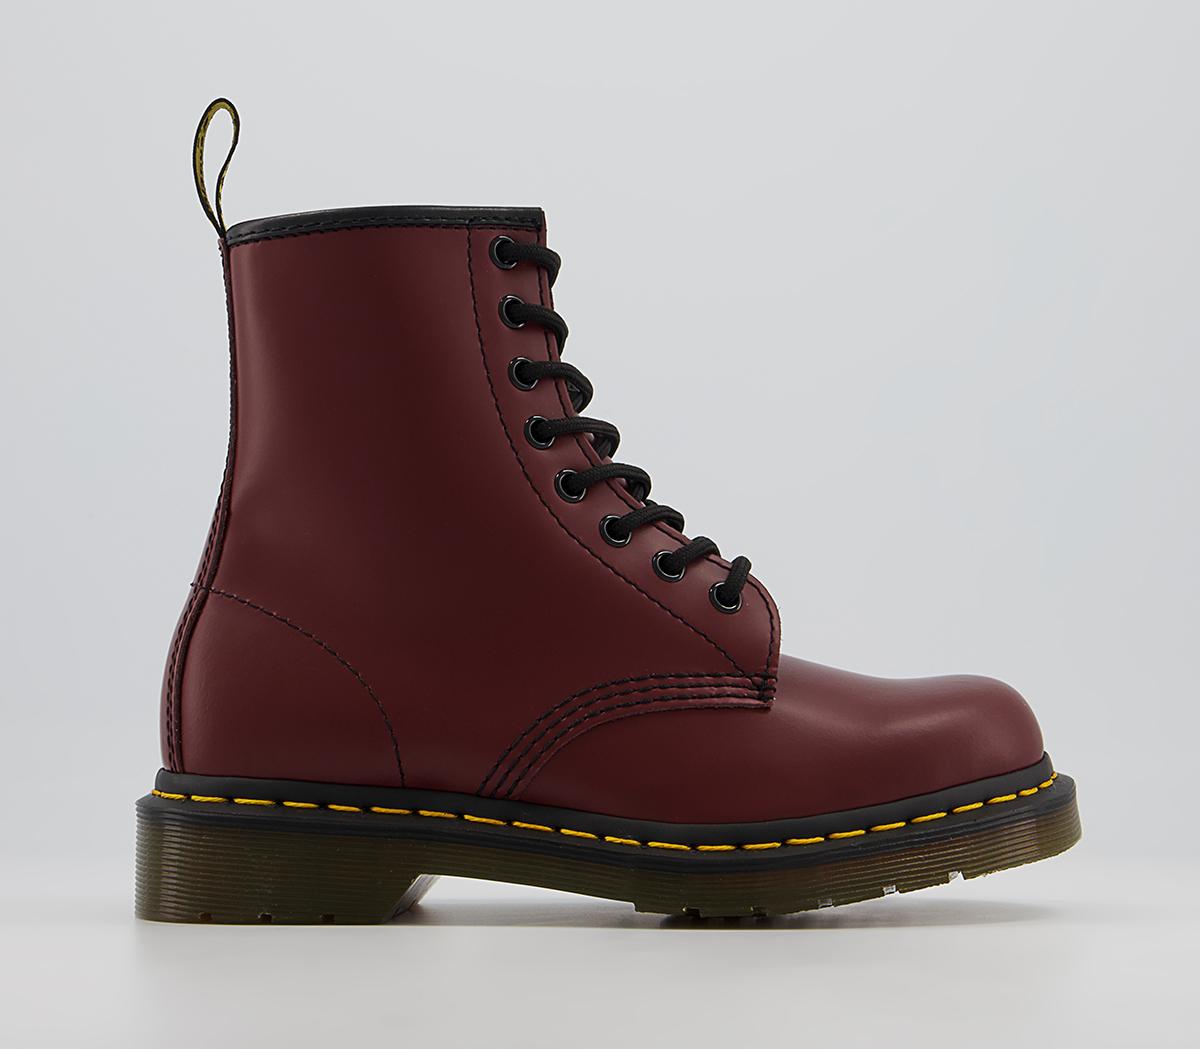 Dr. Martens 8 Eyelet Lace Up Boots Cherry Red - Women's Ankle Boots